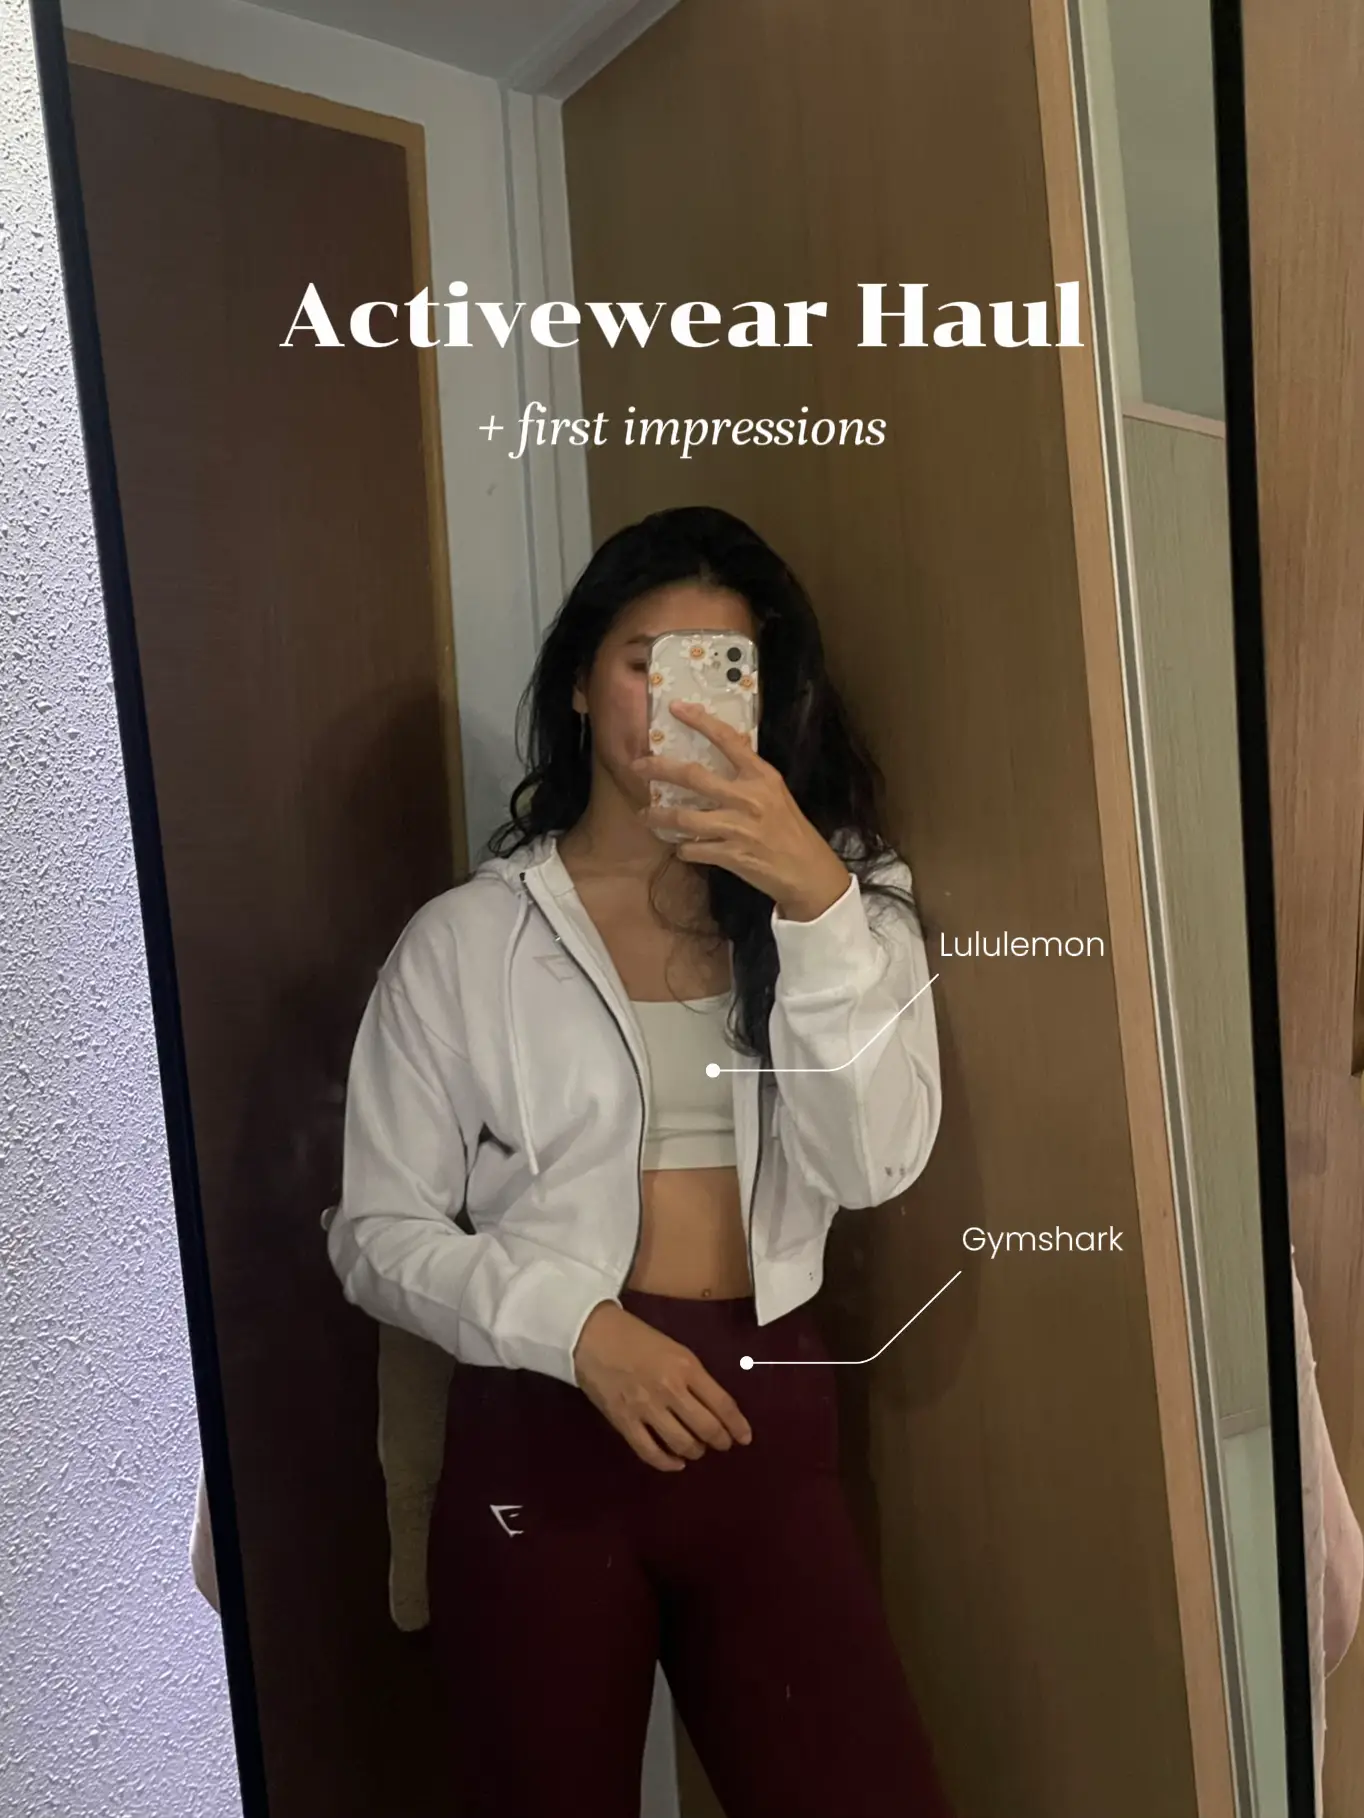 These $12 Gymshark dupes look just like the real thing: '[The] secret is  out